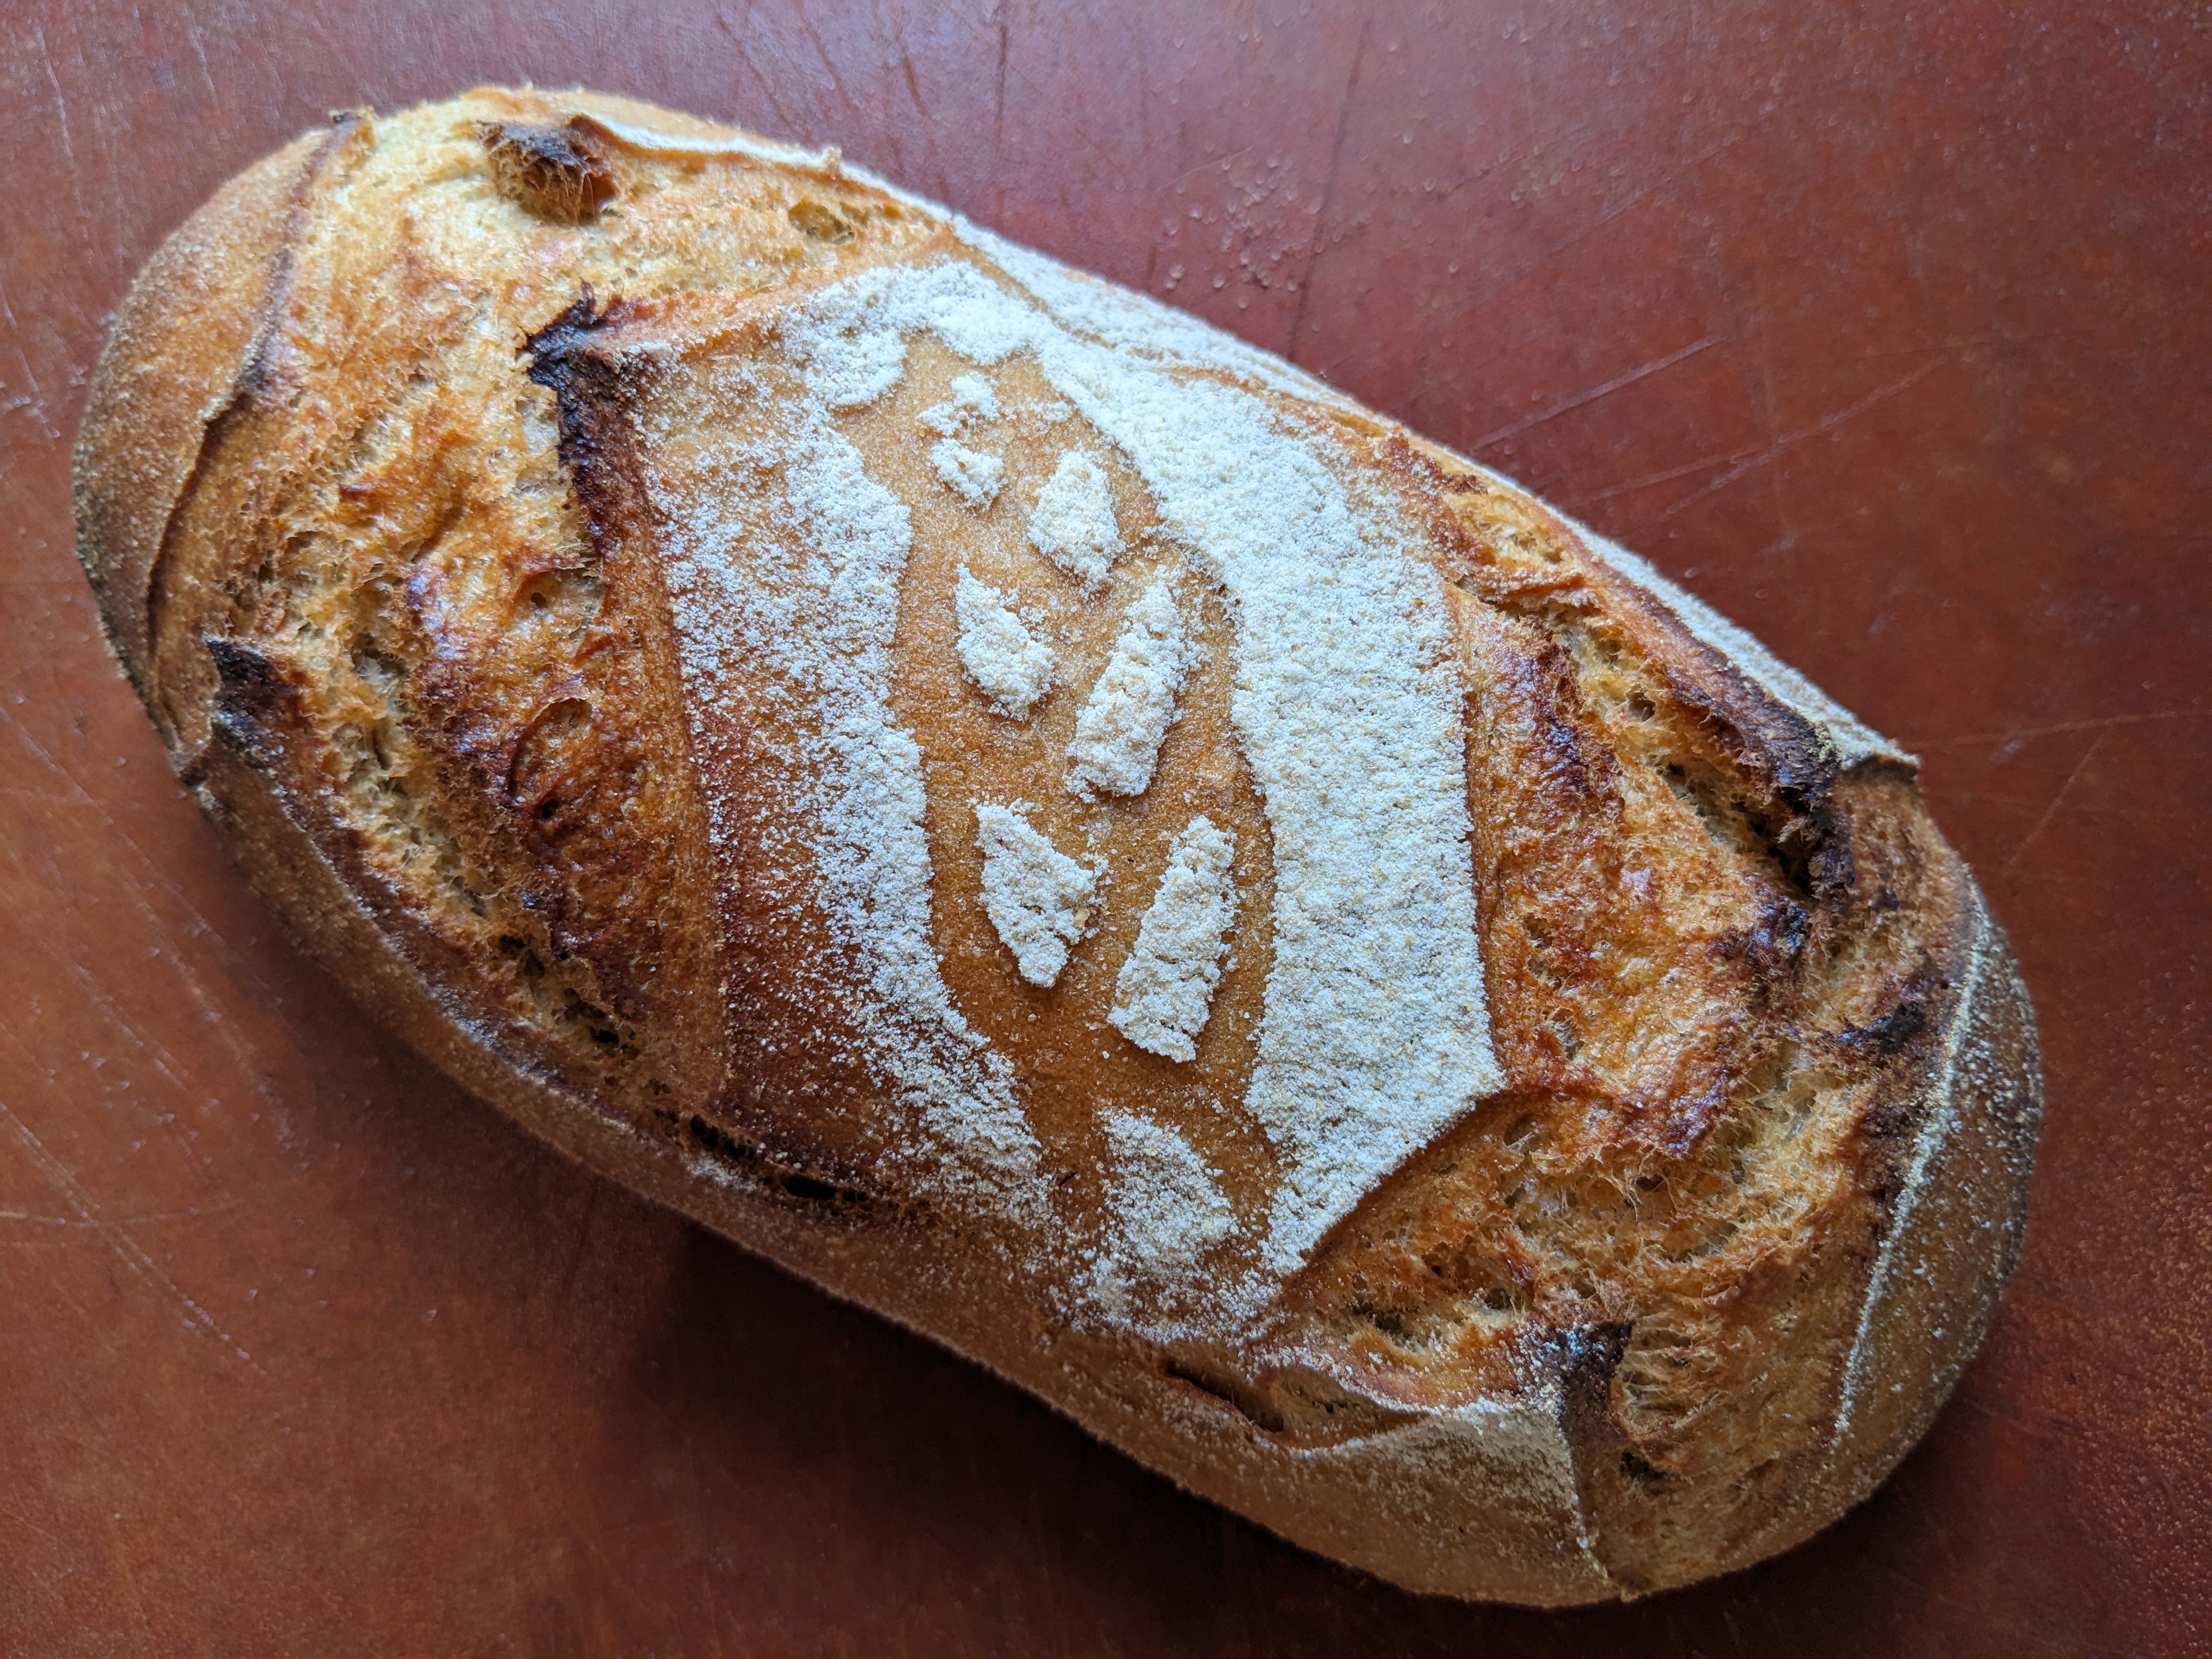 Top view of a loaf of sourdough bread with an image of wheat stenciled on it